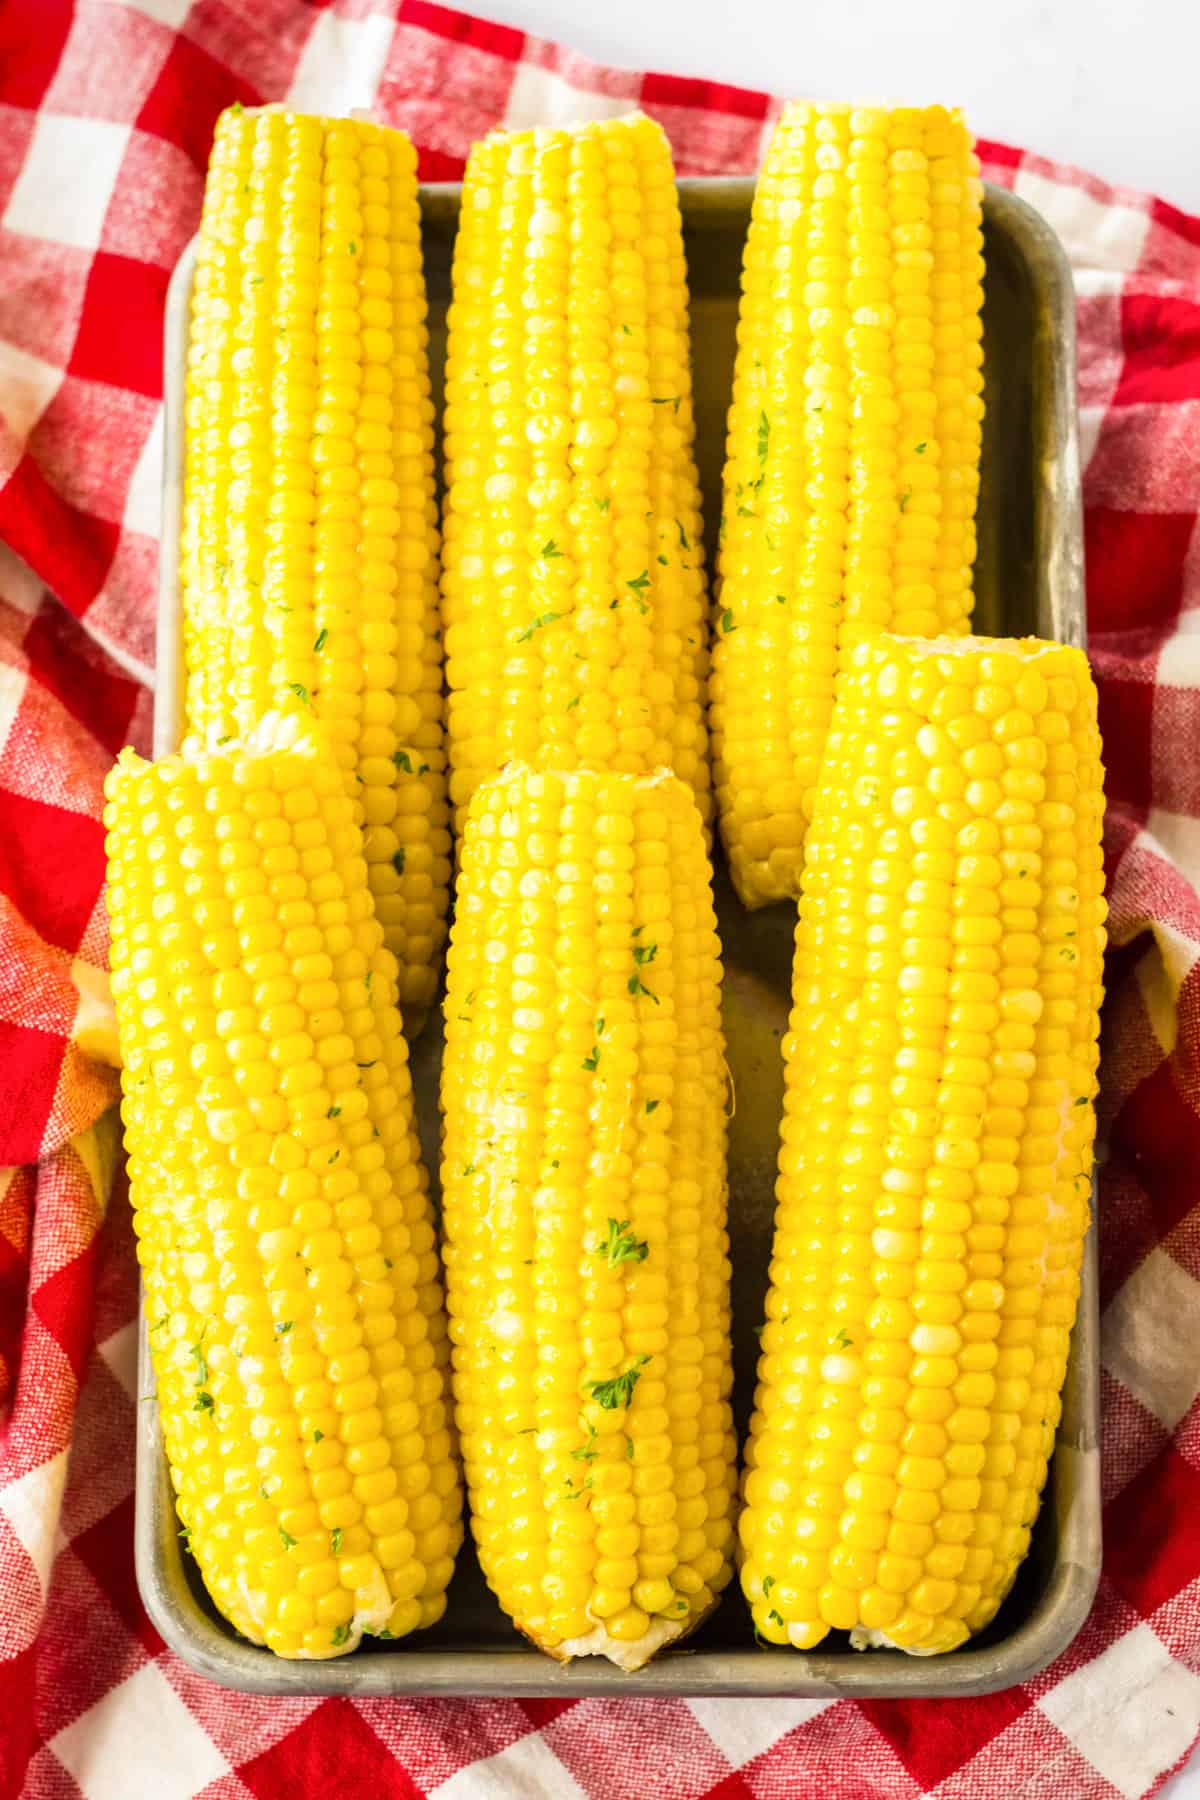 Slow cooked corn on the cob served on a metal tray.